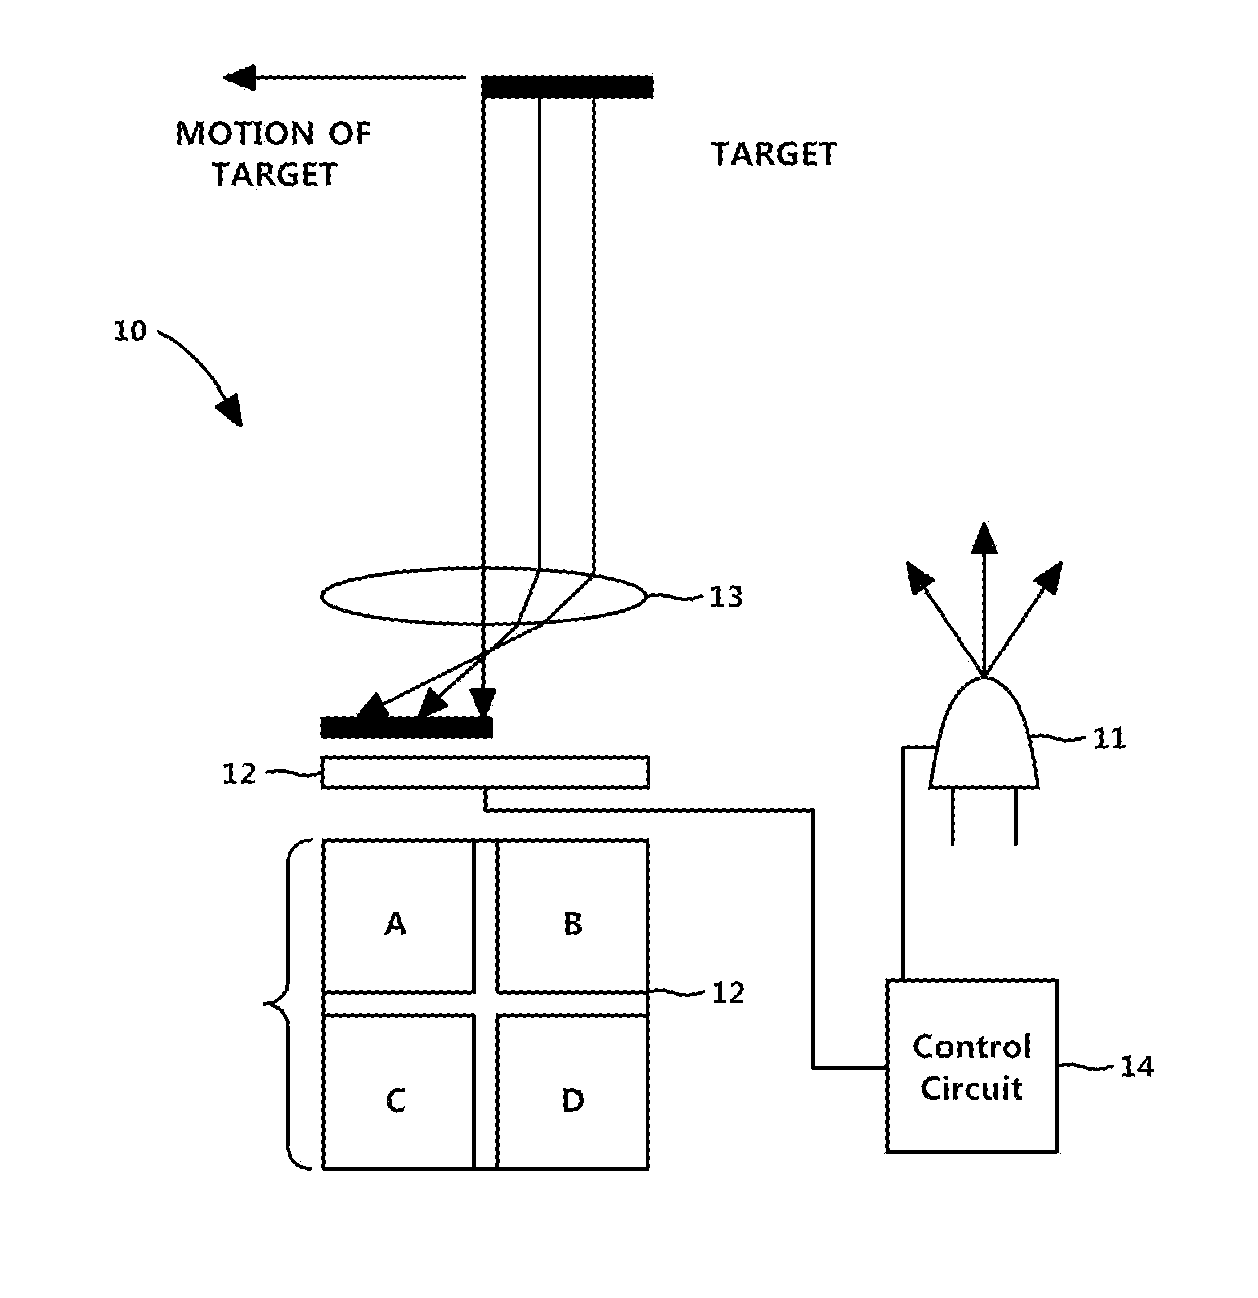 Apparatus and method for recognizing a moving direction of gesture